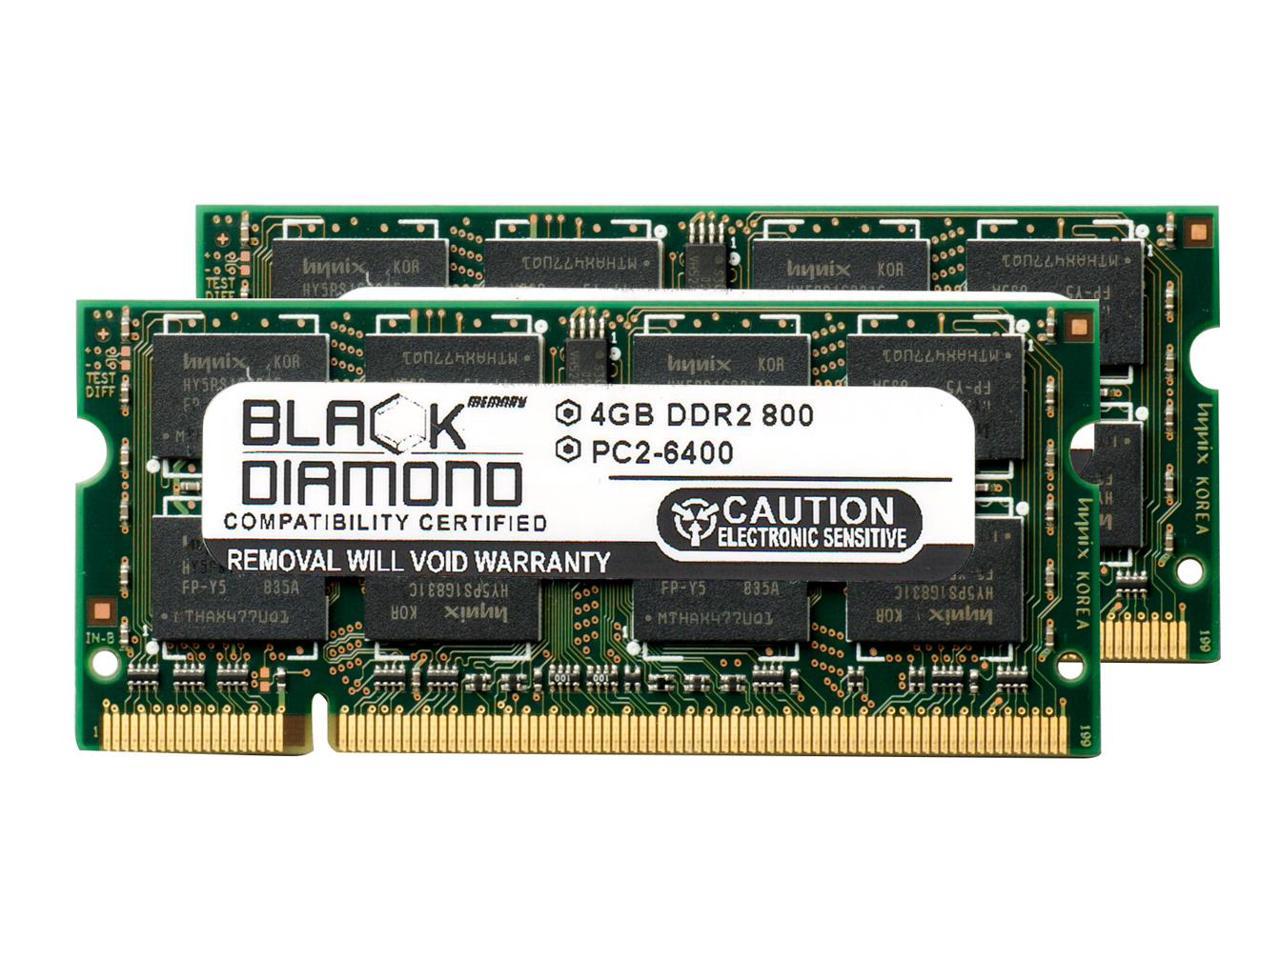 Arch Memory 2 GB 200-Pin DDR2 So-dimm RAM for Dell Vostro 1720 Core 2 Duo 2.1 GHz